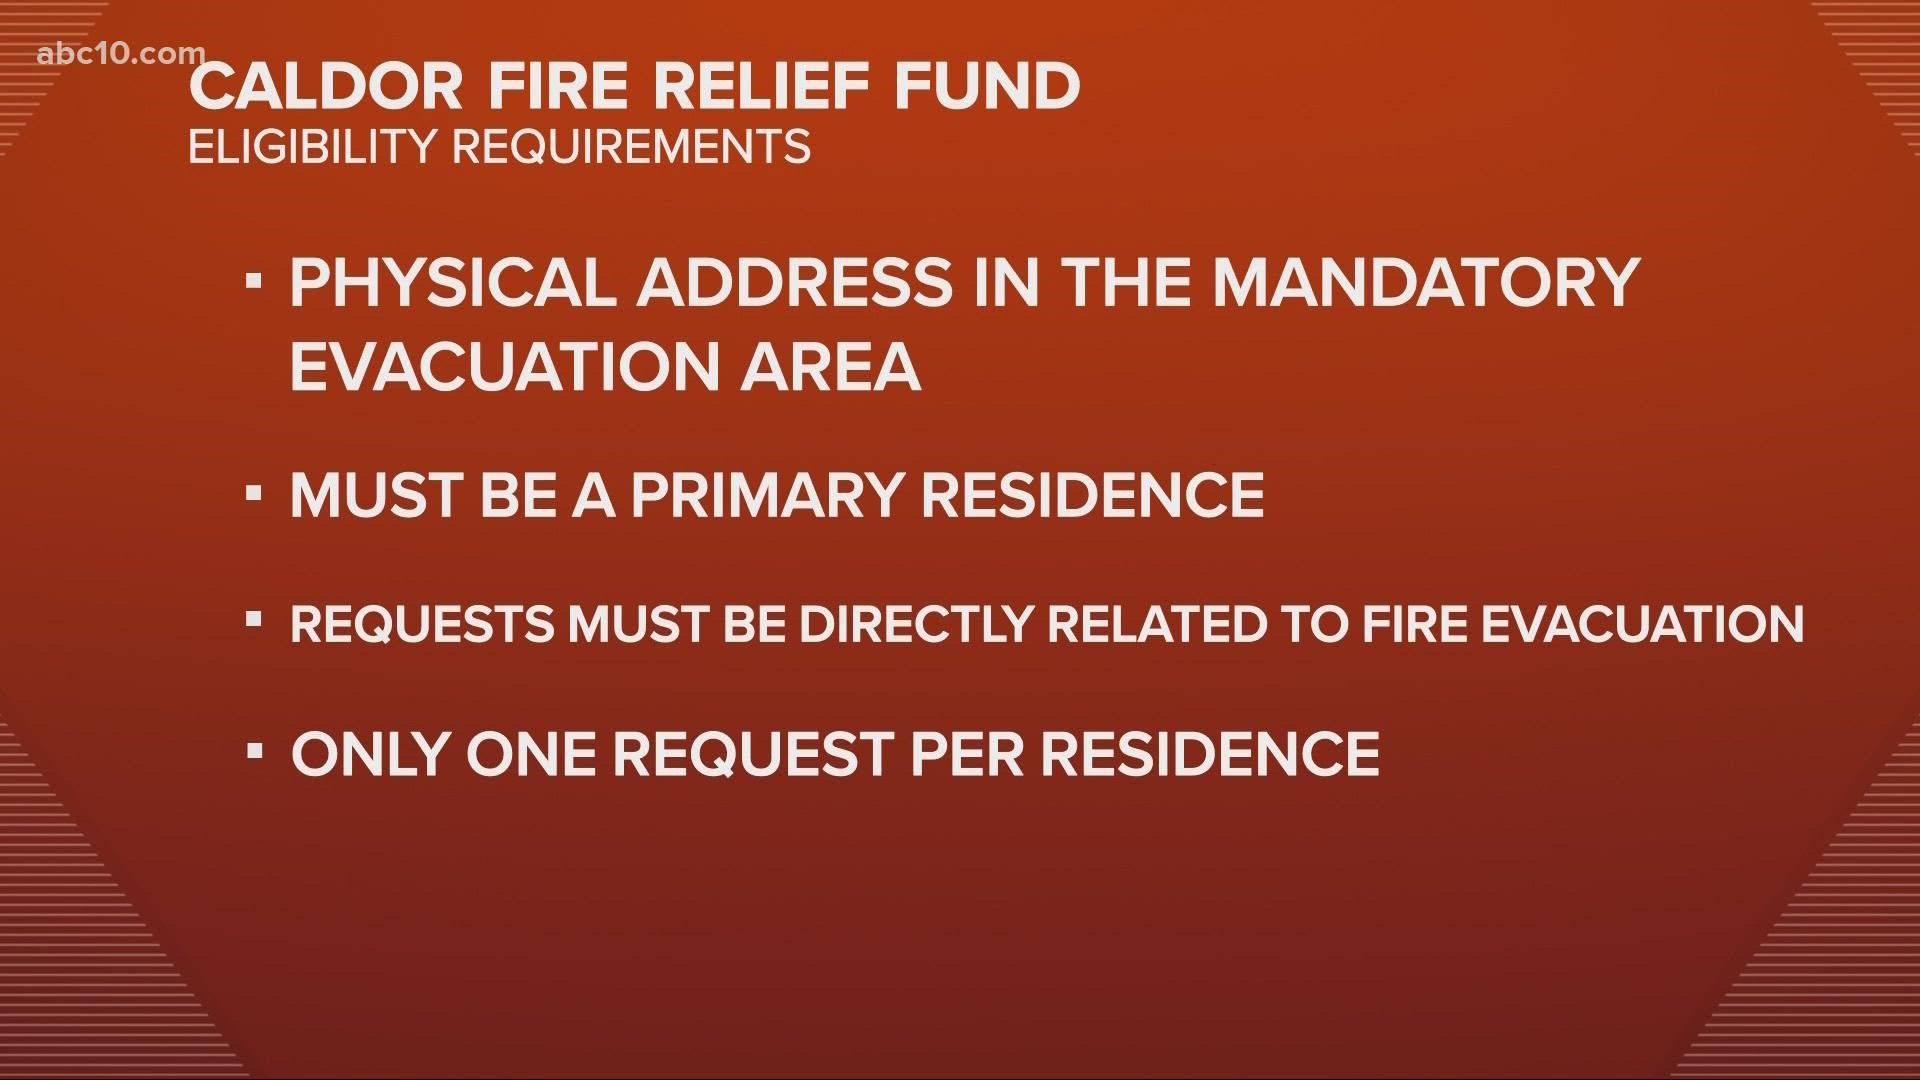 It's not a matter of if, but when federal wildfire relief can help those impacted by the Caldor Fire.